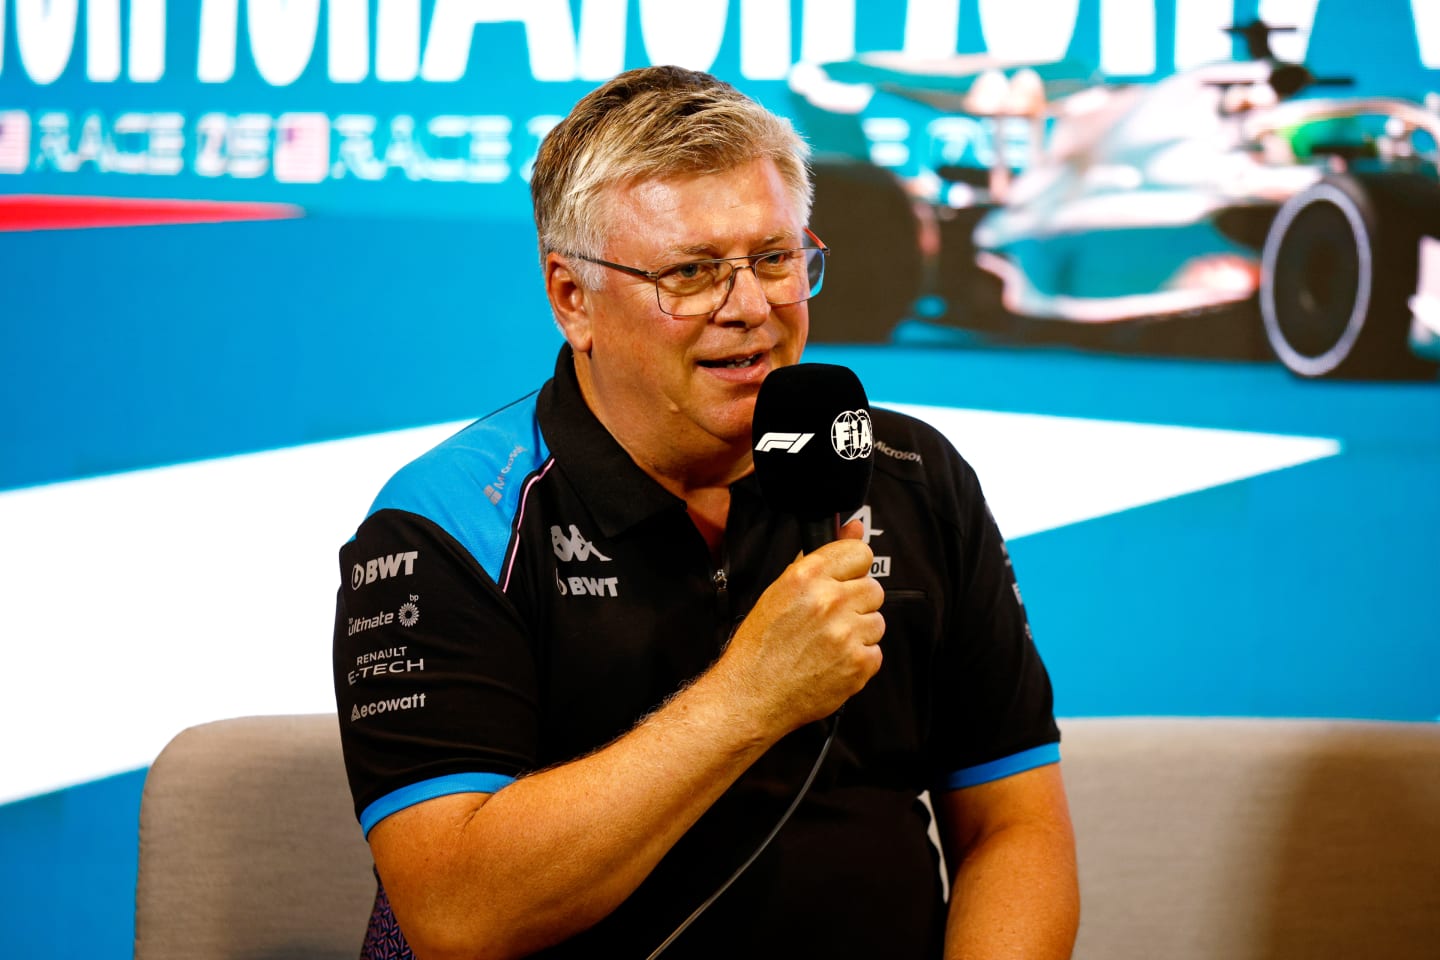 MIAMI, FLORIDA - MAY 05: Otmar Szafnauer, Team Principal of Alpine F1 attends the Team Principals Press Conference during practice ahead of the F1 Grand Prix of Miami at Miami International Autodrome on May 05, 2023 in Miami, Florida. (Photo by Jared C. Tilton/Getty Images)